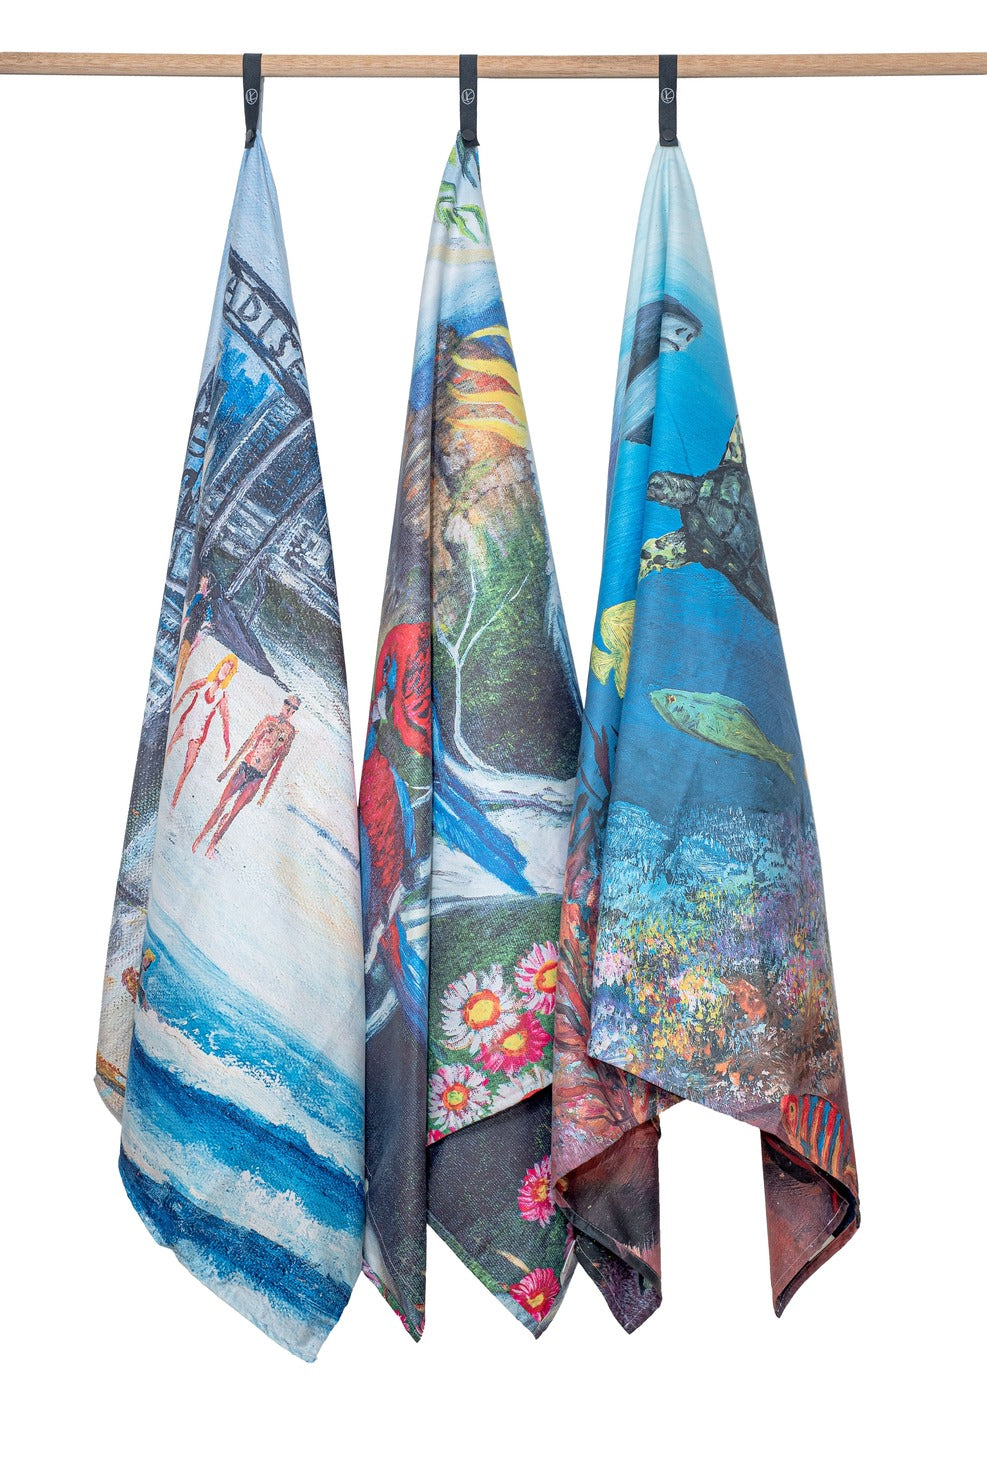 Surfers Paradise, Blue Mountains and The Great Barrier Reef Microfibre Artistic Towels. Large size, 170cm x 95cm, soft touch, compact and sand free beach towel. An Aussie-inspired art showcasing magnificent landmarks and the Aussie lifestyle